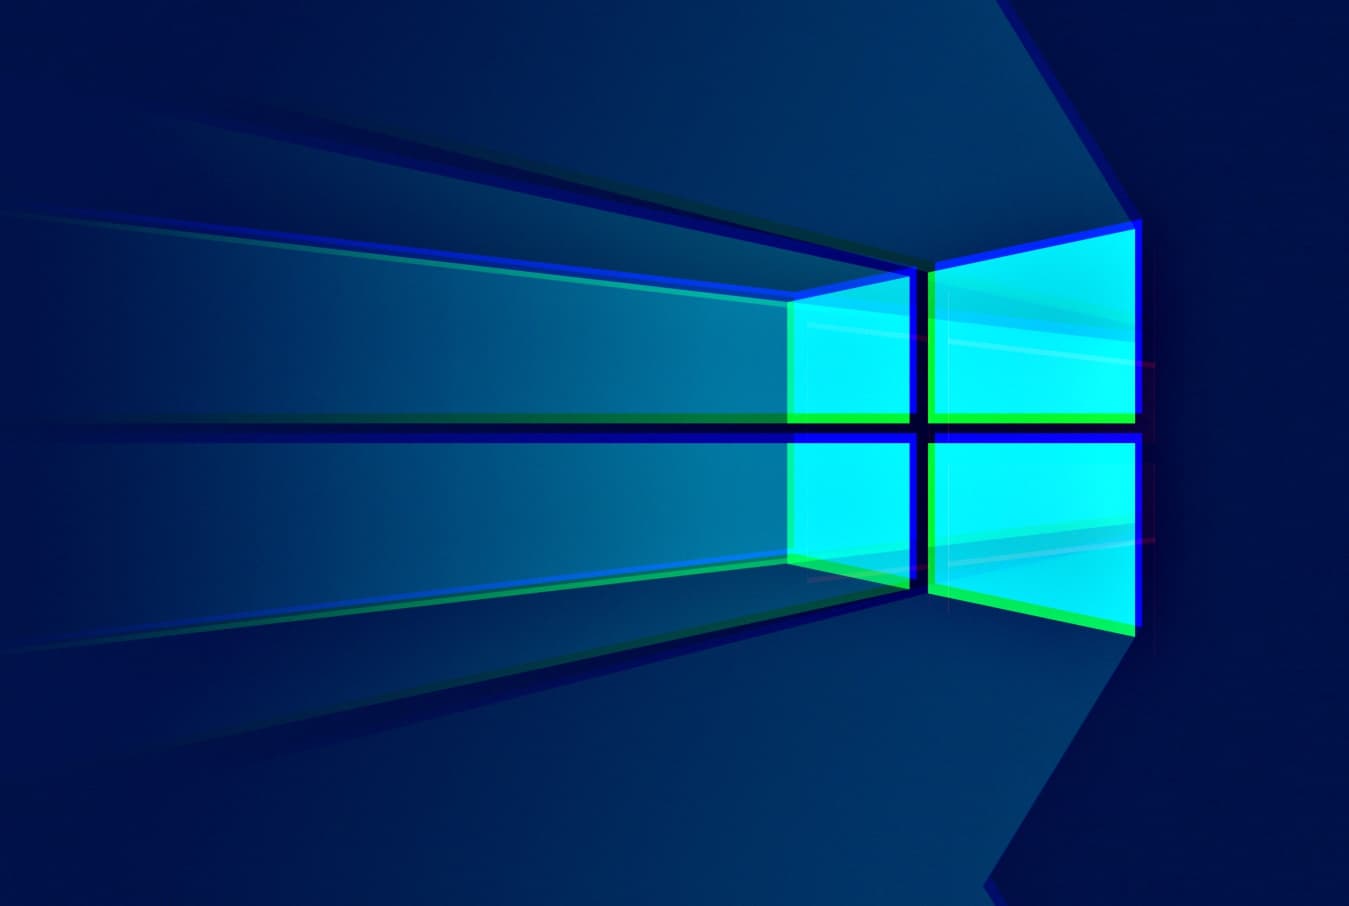 New SystemBC malware targets Windows PCs by evading detection